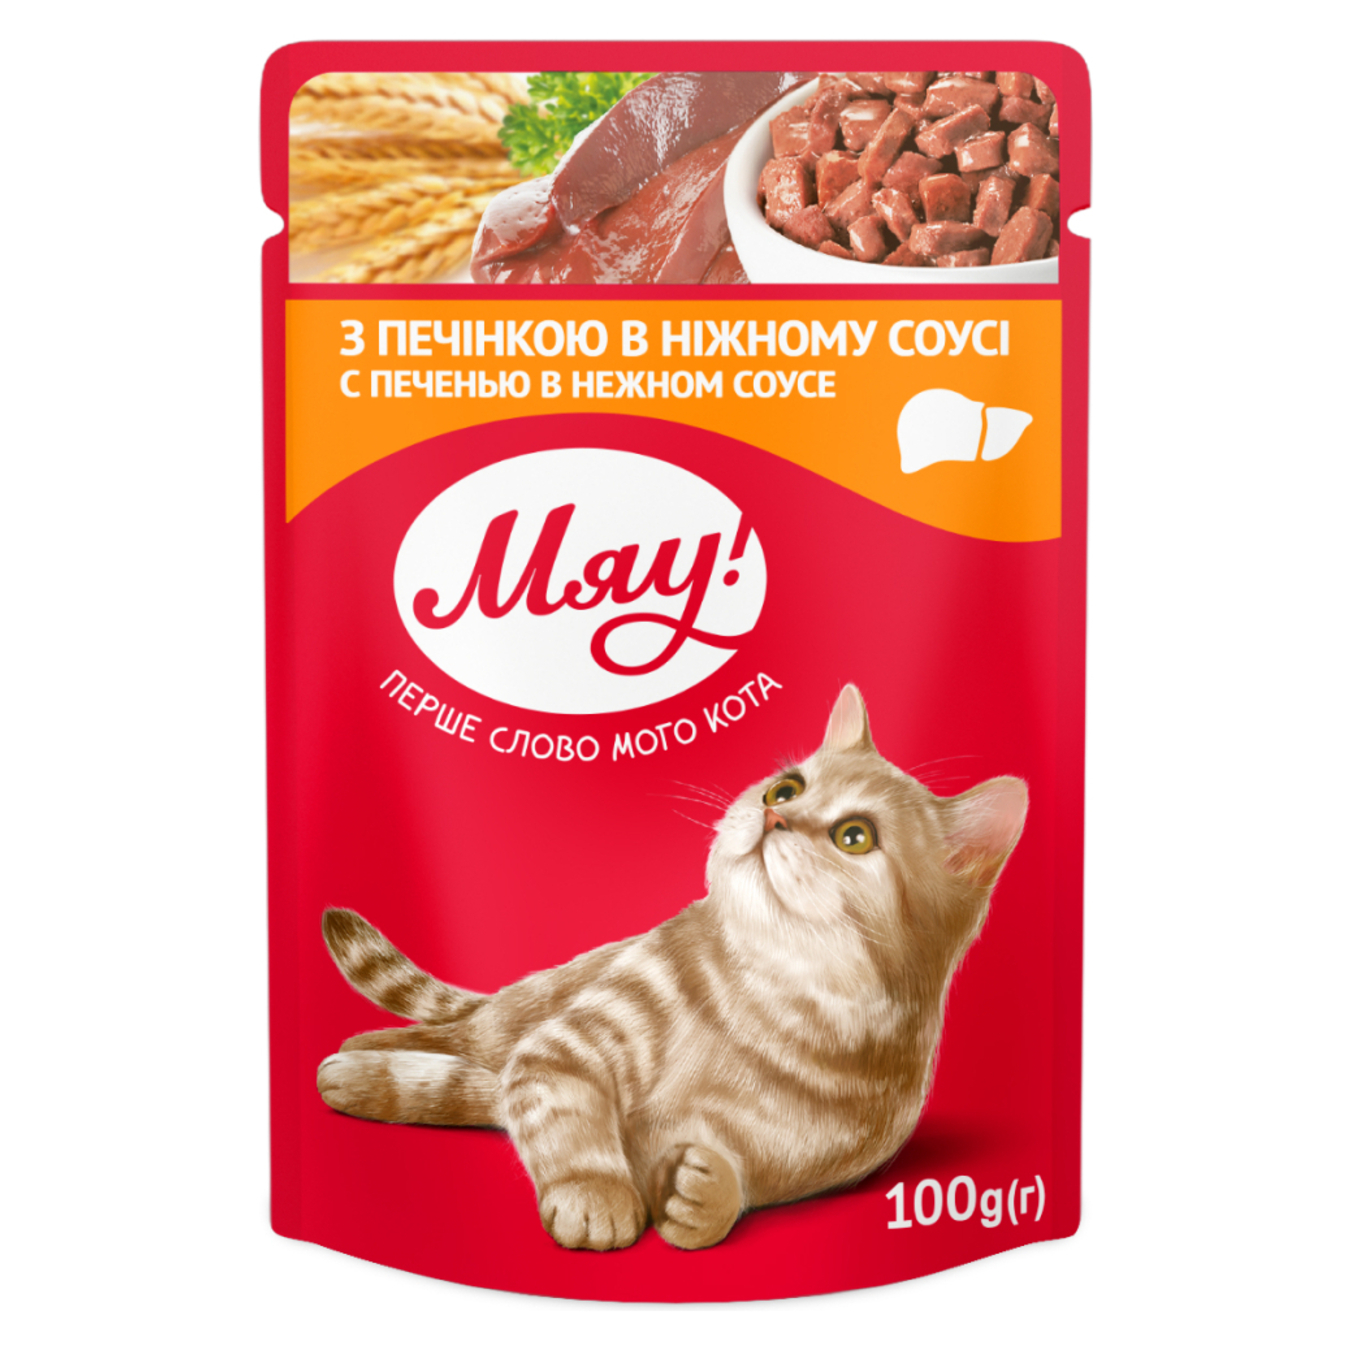 Miau! feed Liver in a gentle sauce 100g